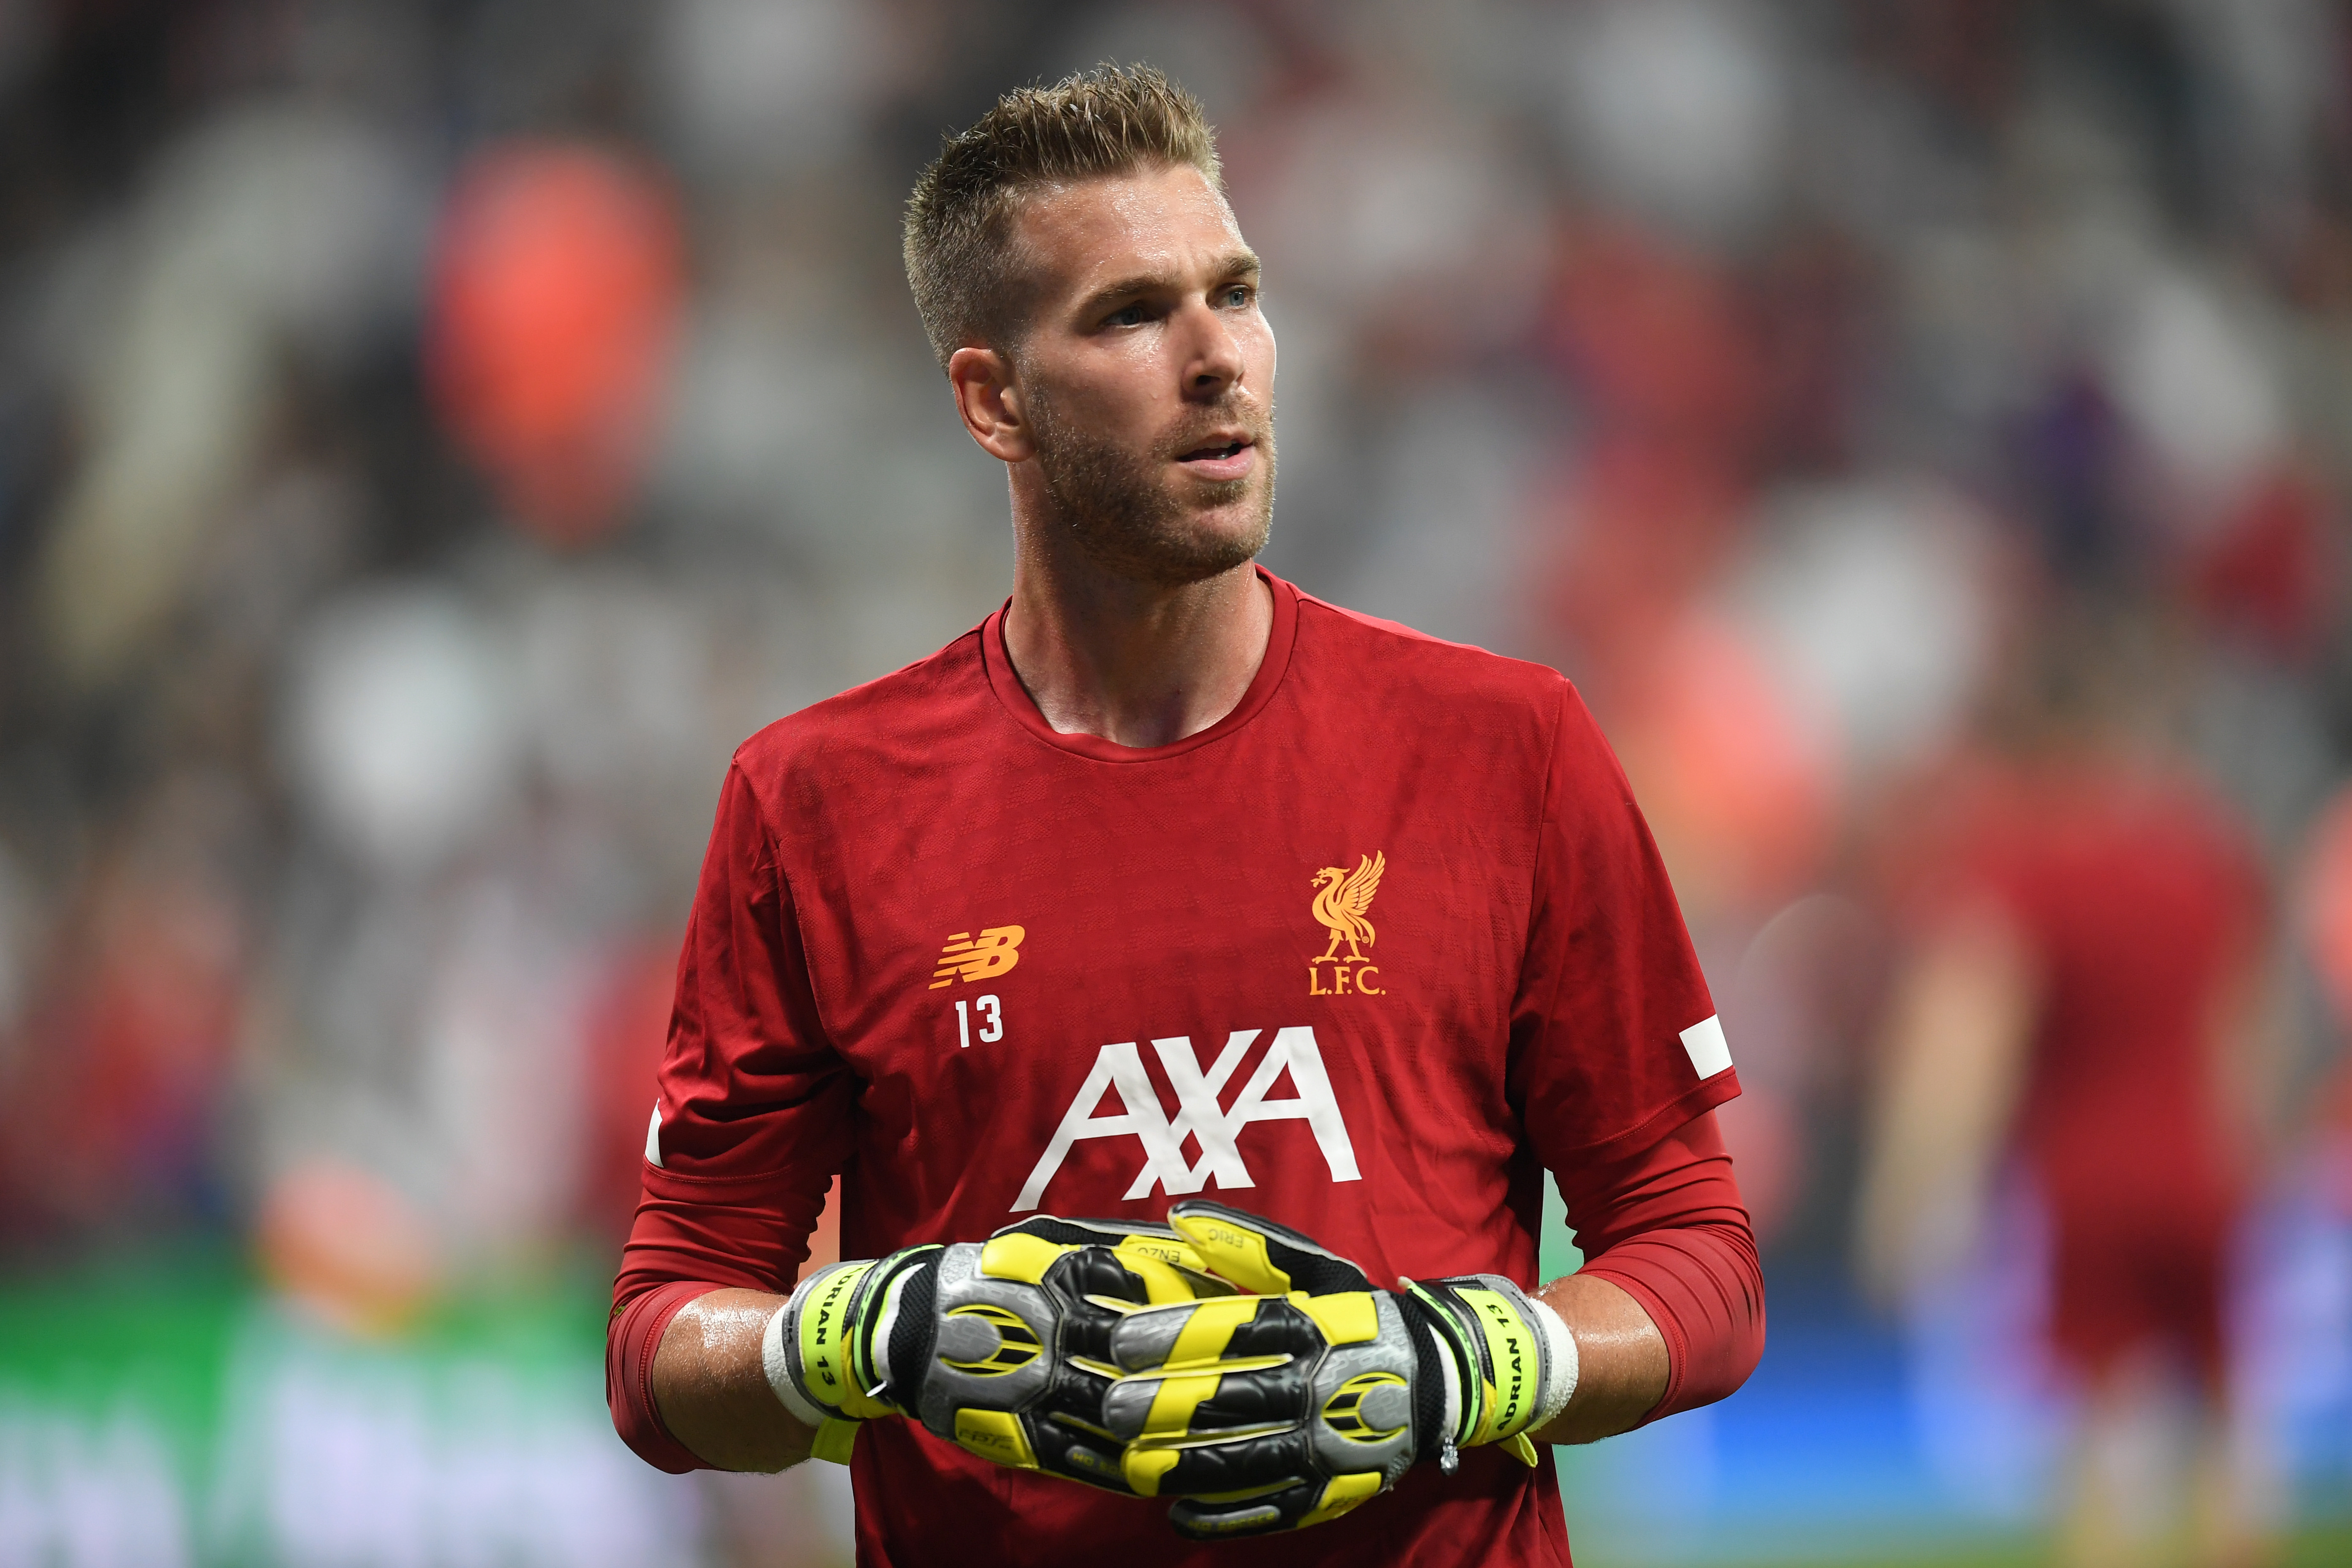 ISTANBUL, TURKEY - AUGUST 14: Adrian of Liverpool looks on prior to the UEFA Super Cup match between Liverpool and Chelsea at Vodafone Park on August 14, 2019 in Istanbul, Turkey. (Photo by Michael Regan/Getty Images)